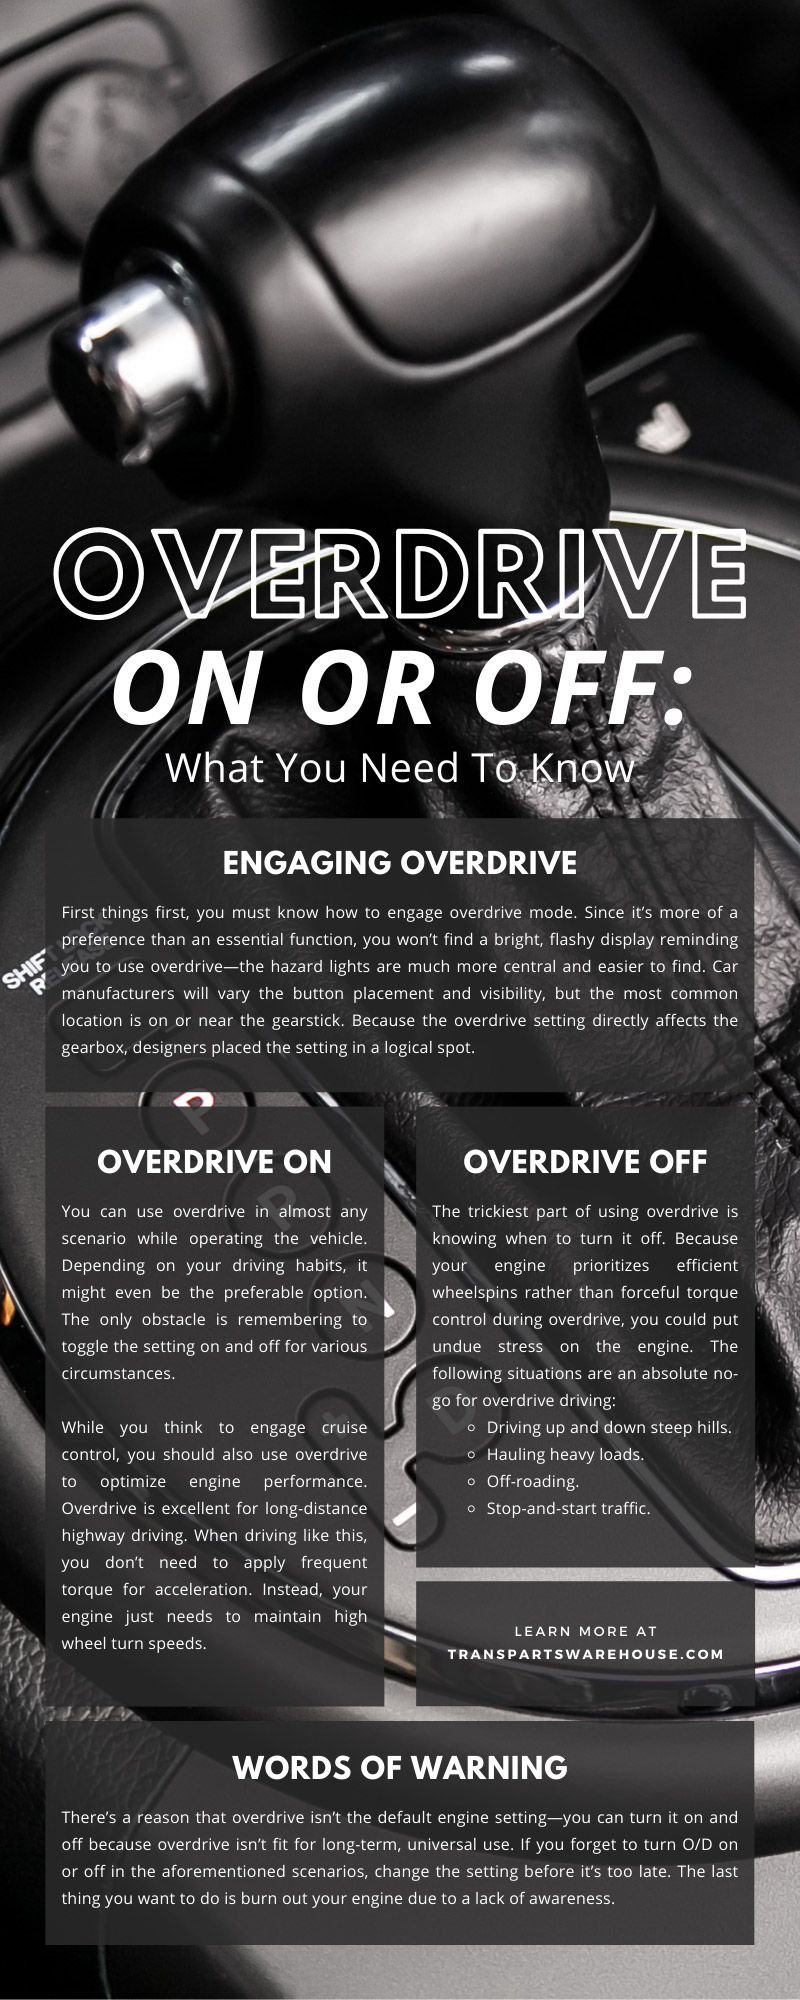 Overdrive On or Off: What You Need To Know